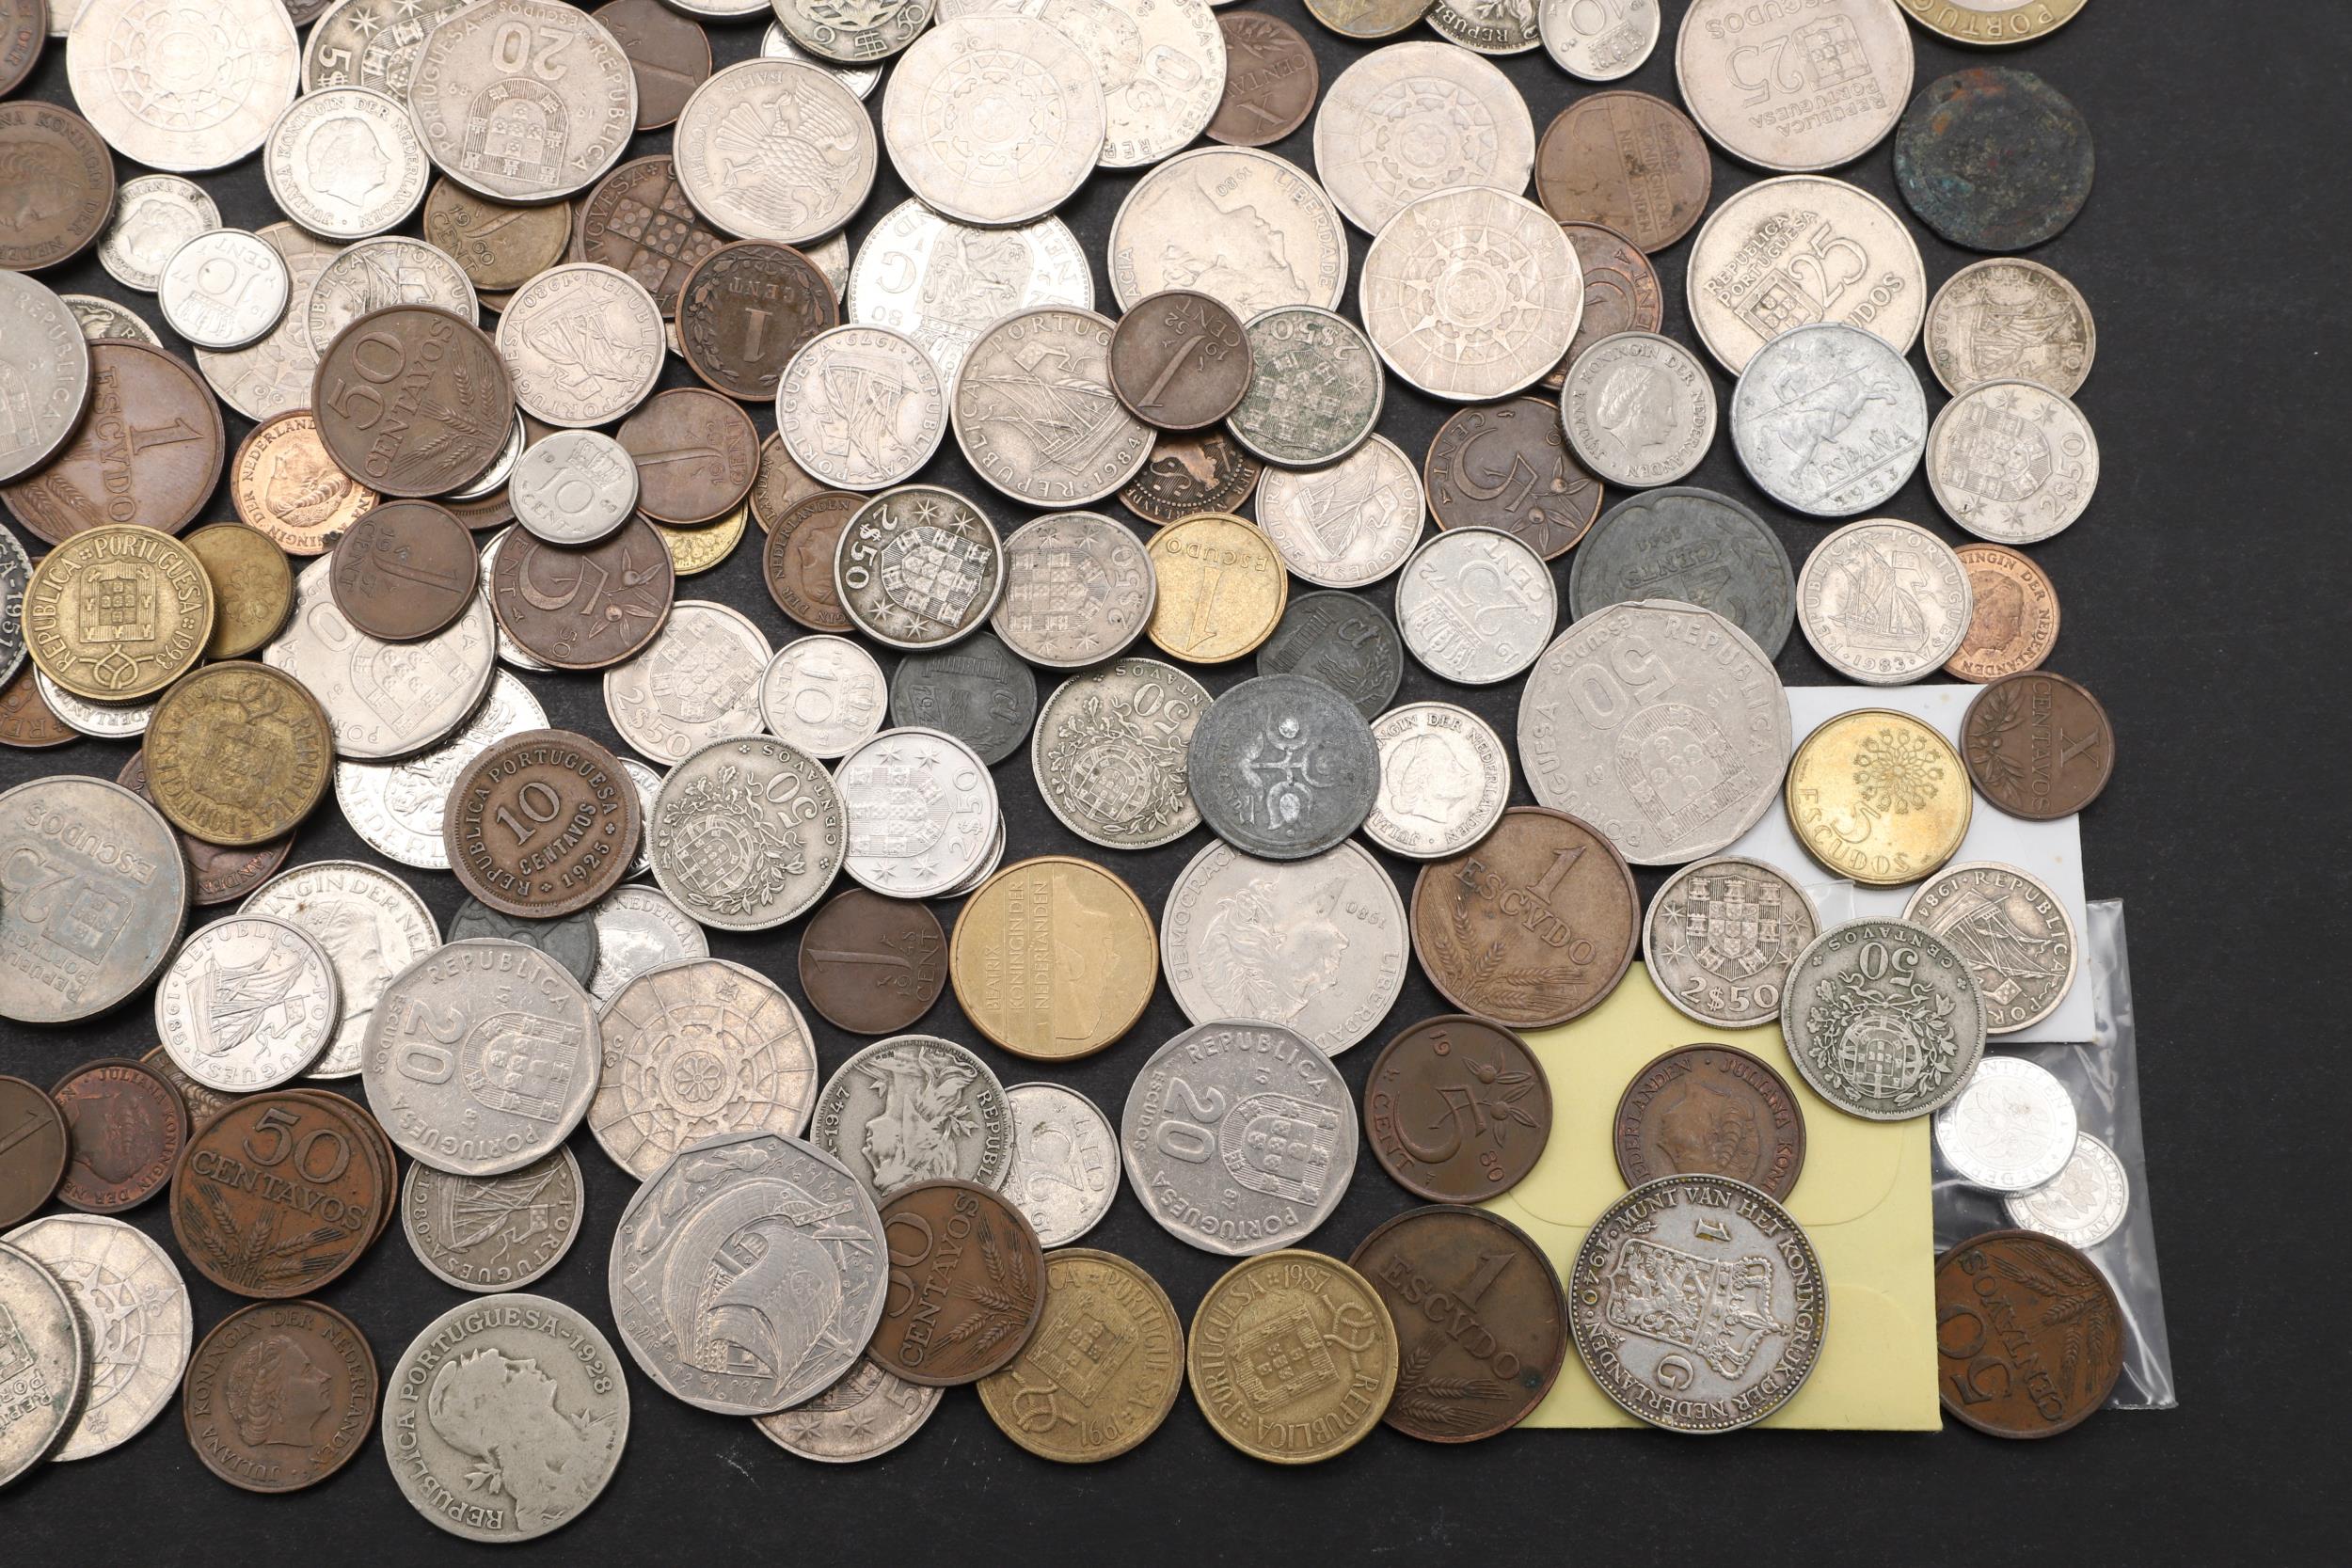 A MIXED COLLECTION OF PORTUGUESE, DUTCH AND OTHER WORLD COINS. - Image 5 of 5